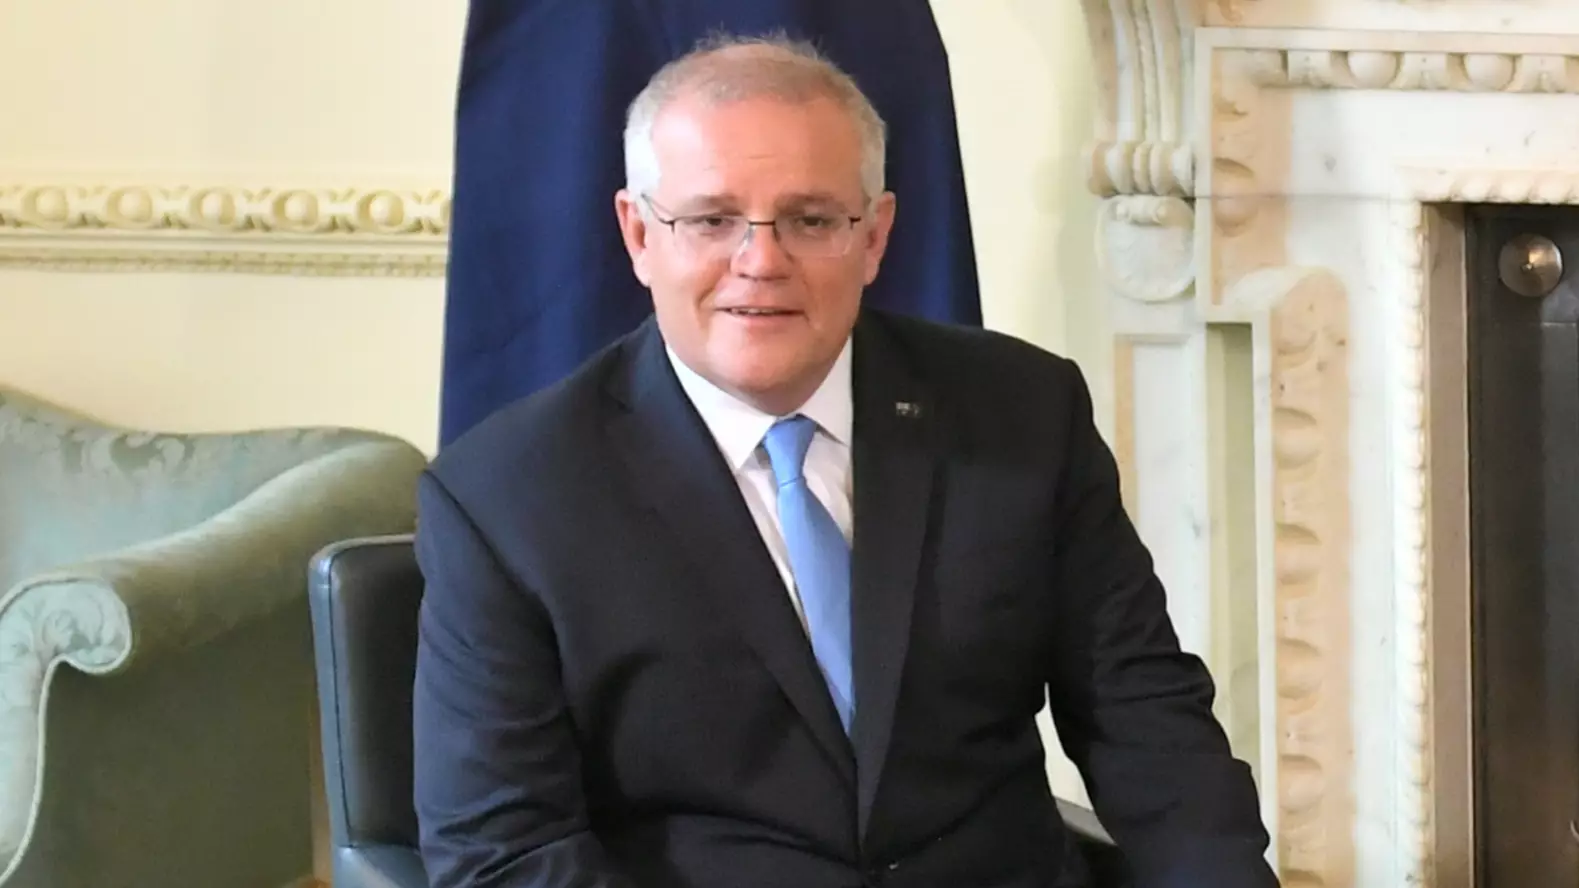 Scott Morrison Declares Covid-19 Vaccine Will Be Mandatory For Some Frontline Workers